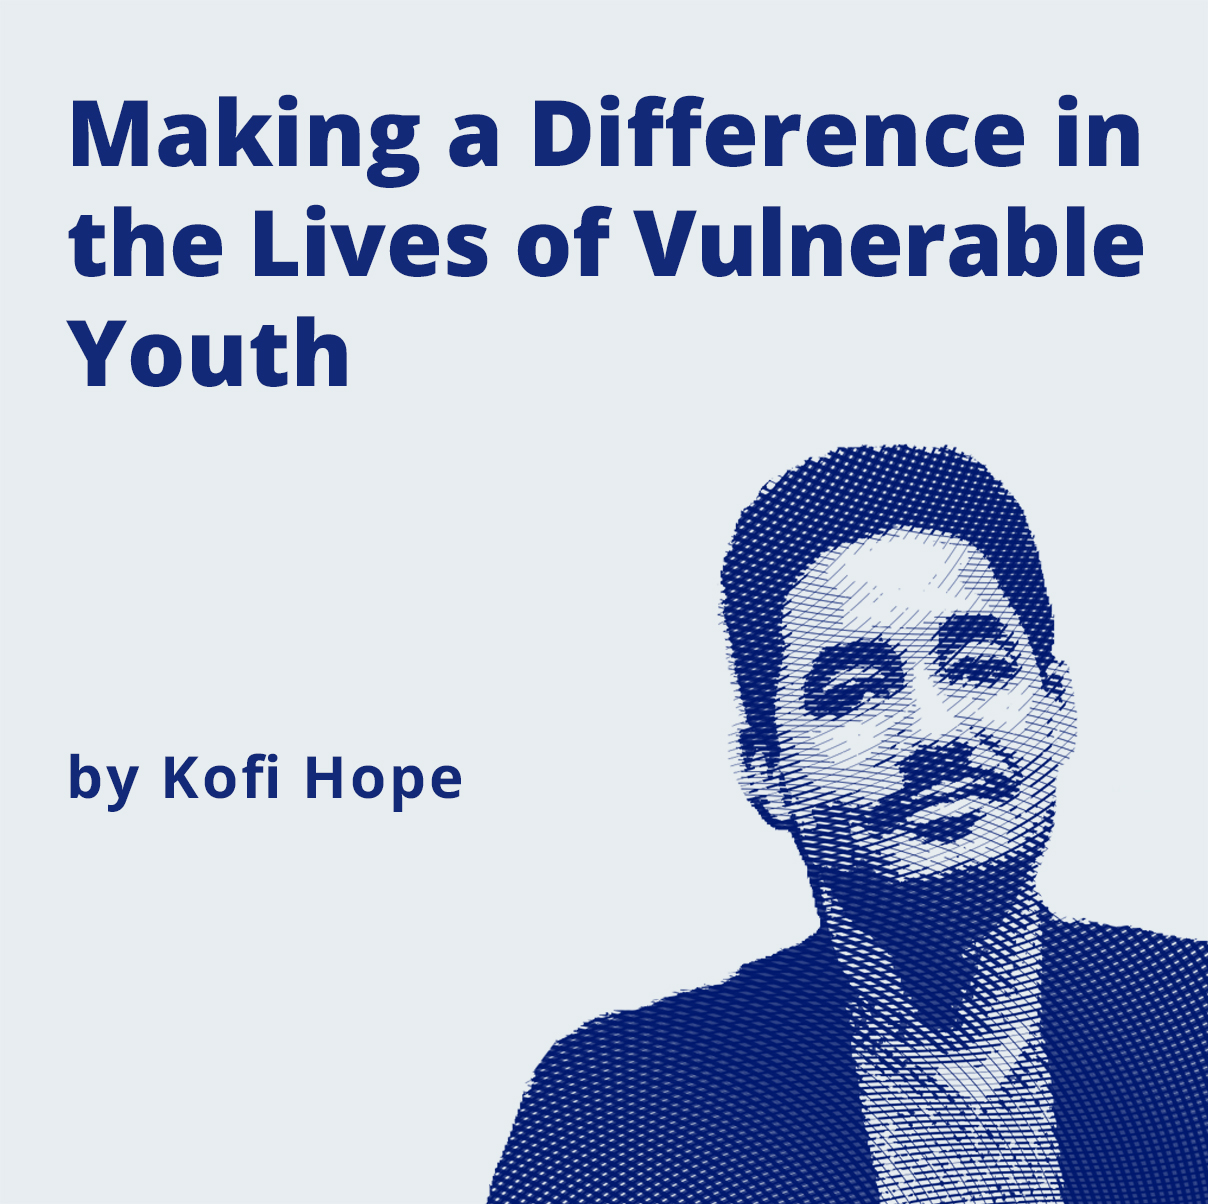 Image -  Making a Difference in the Lives of Vulnerable Youth by Kofi Hope